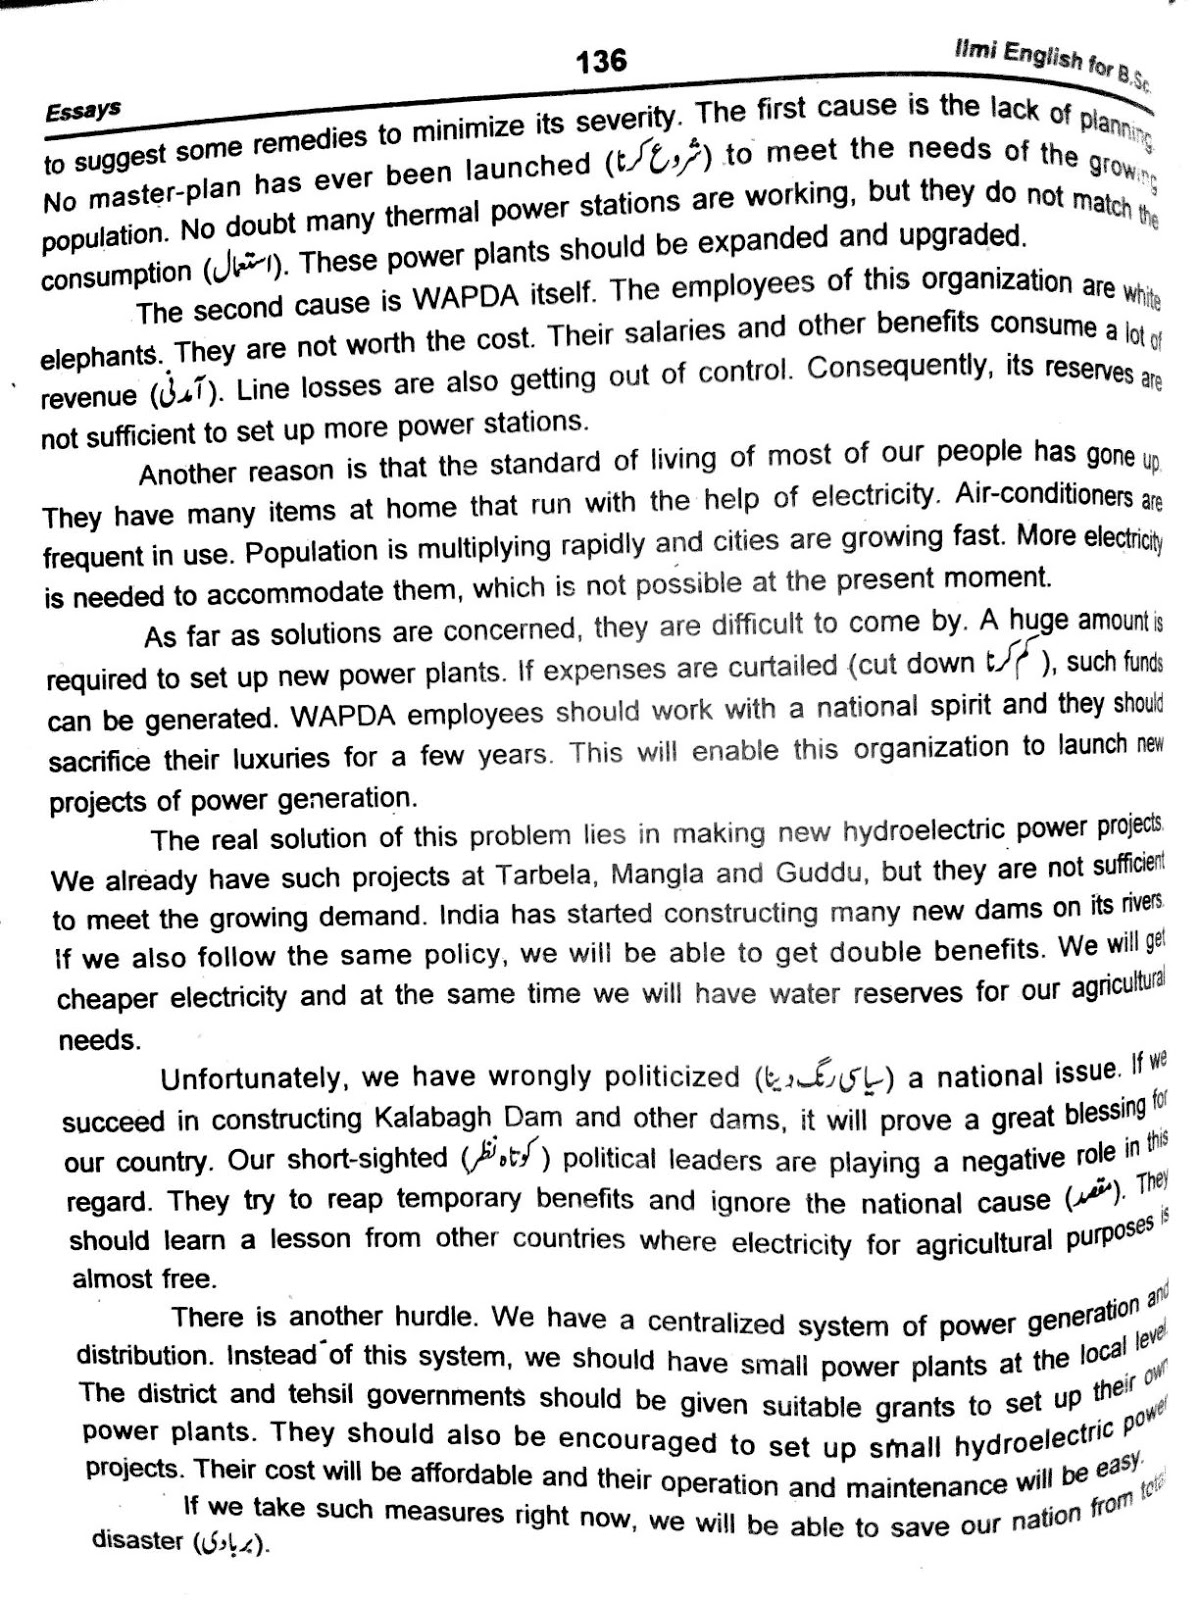 essay on load shedding crisis in pakistan